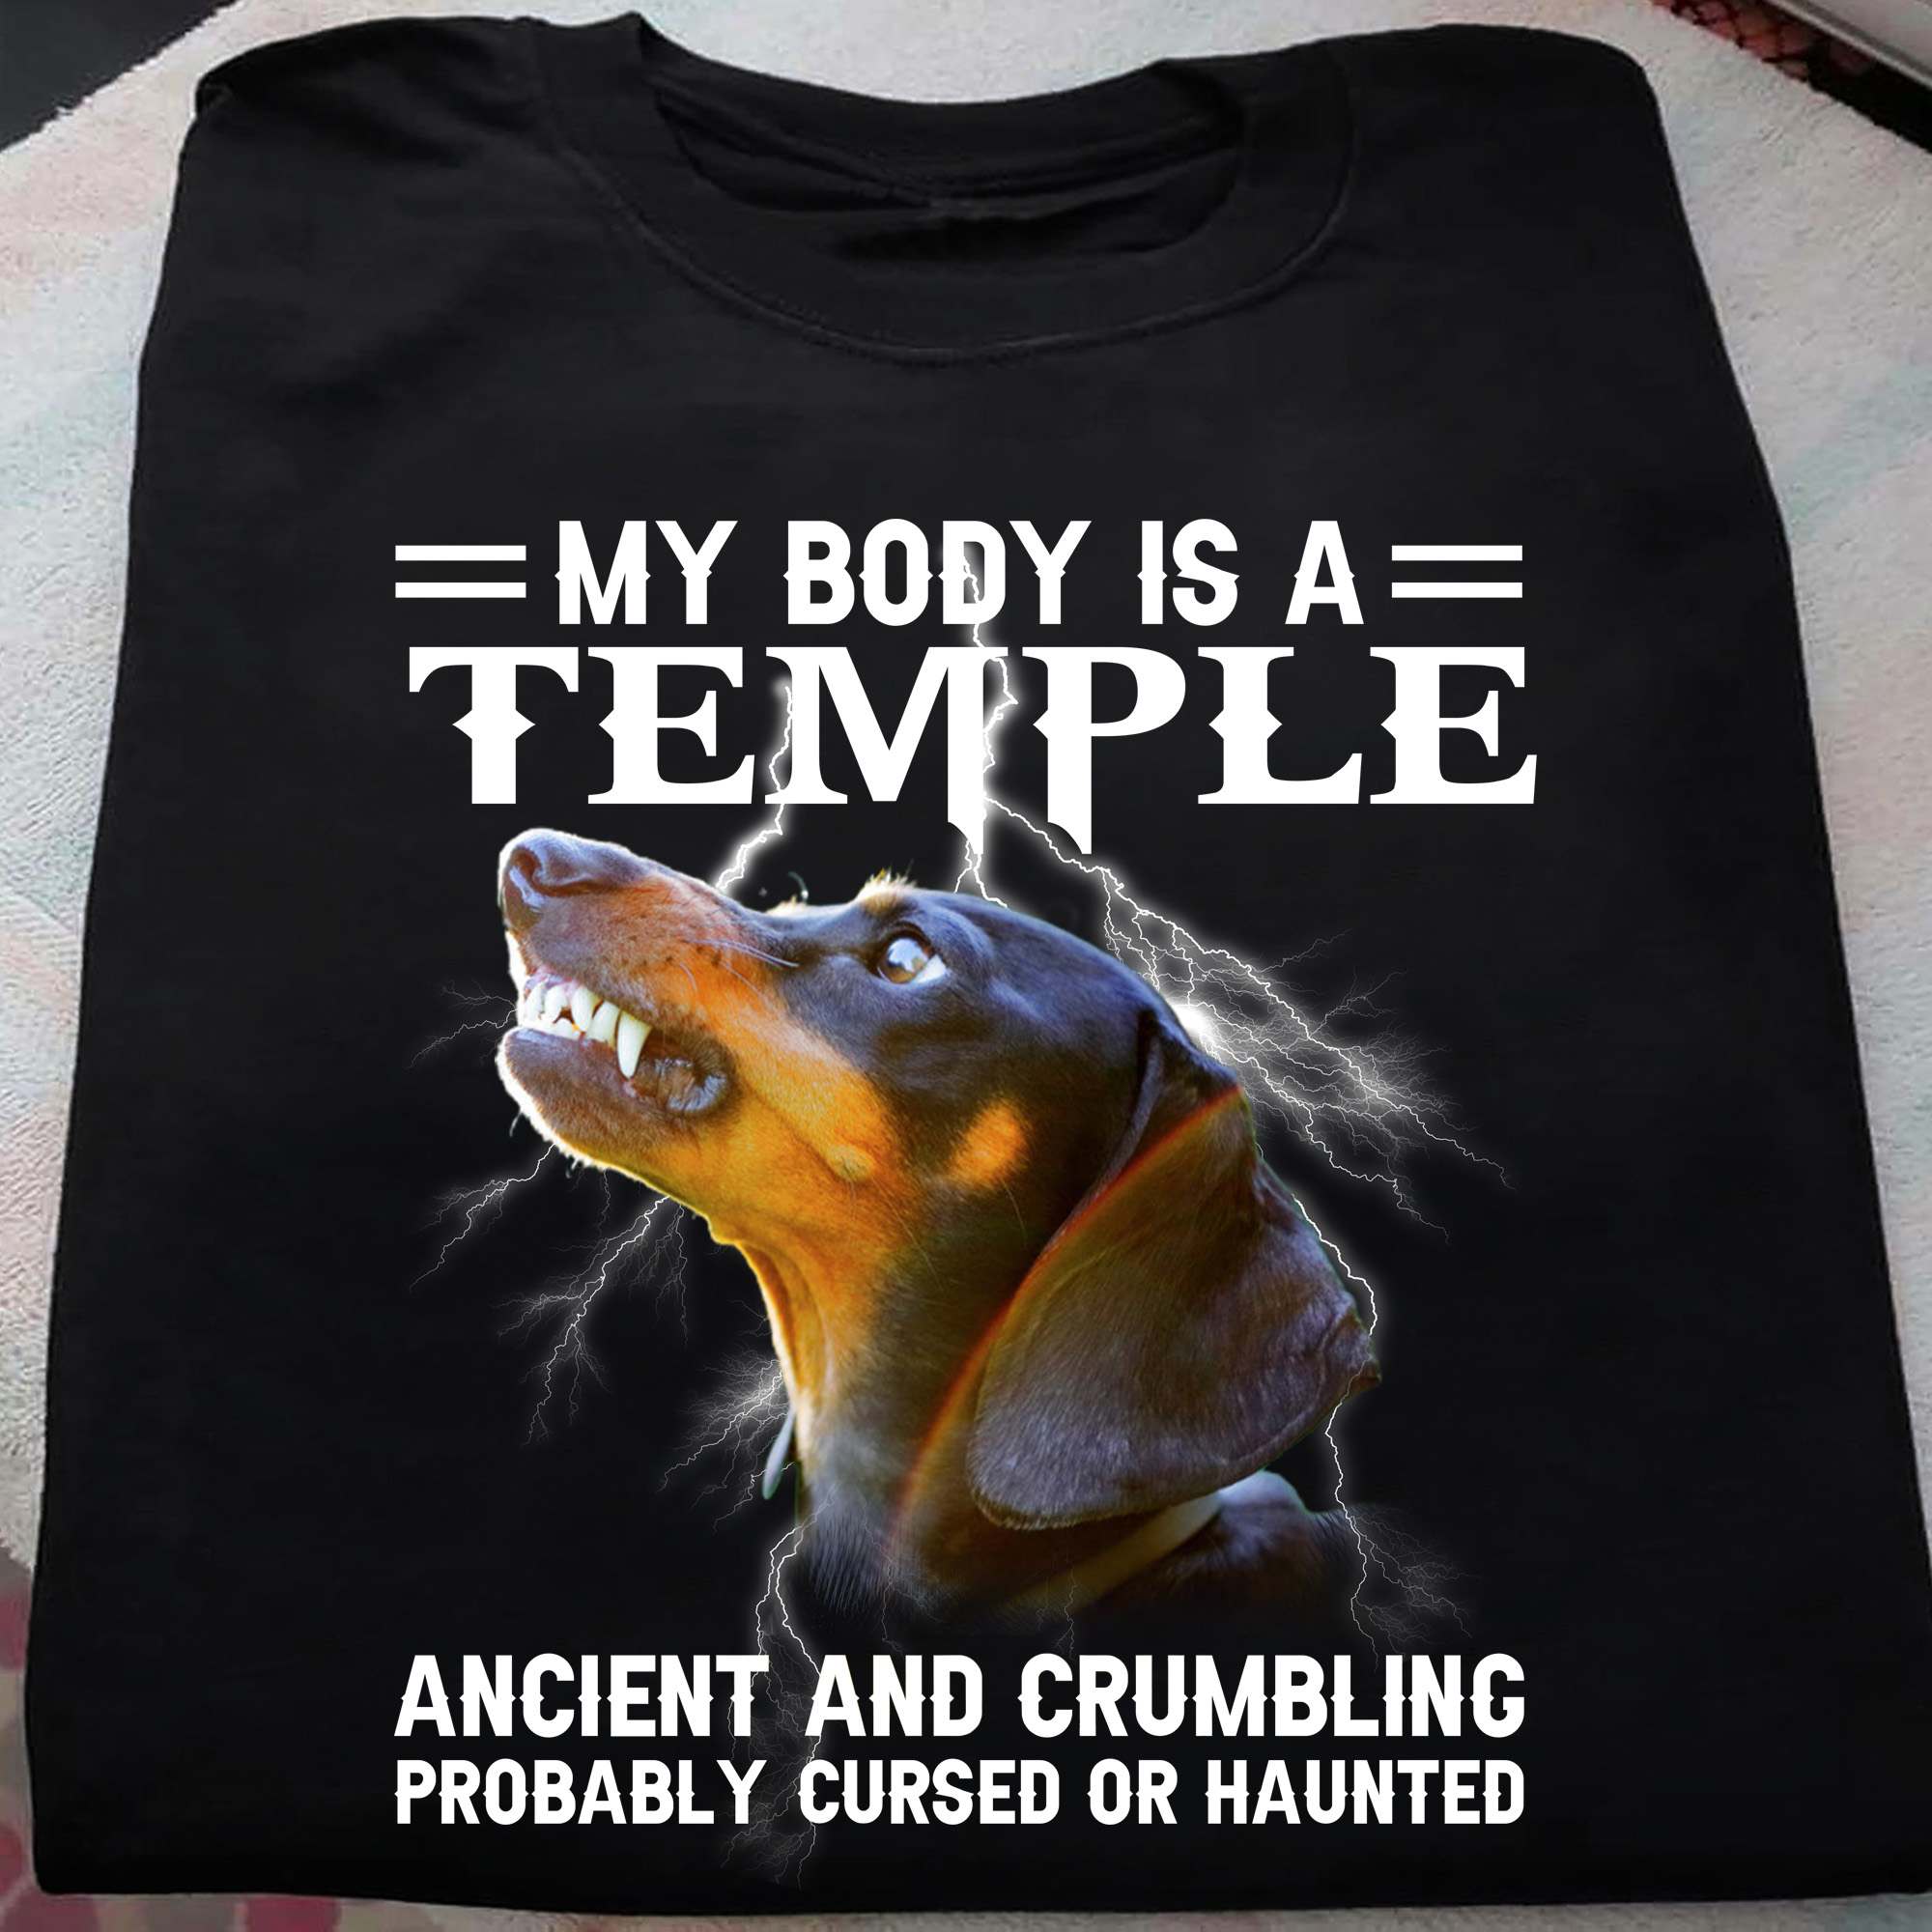 My body is a temple ancient and crumbling probably cursed or haunted - Grumpy Dachshund dog